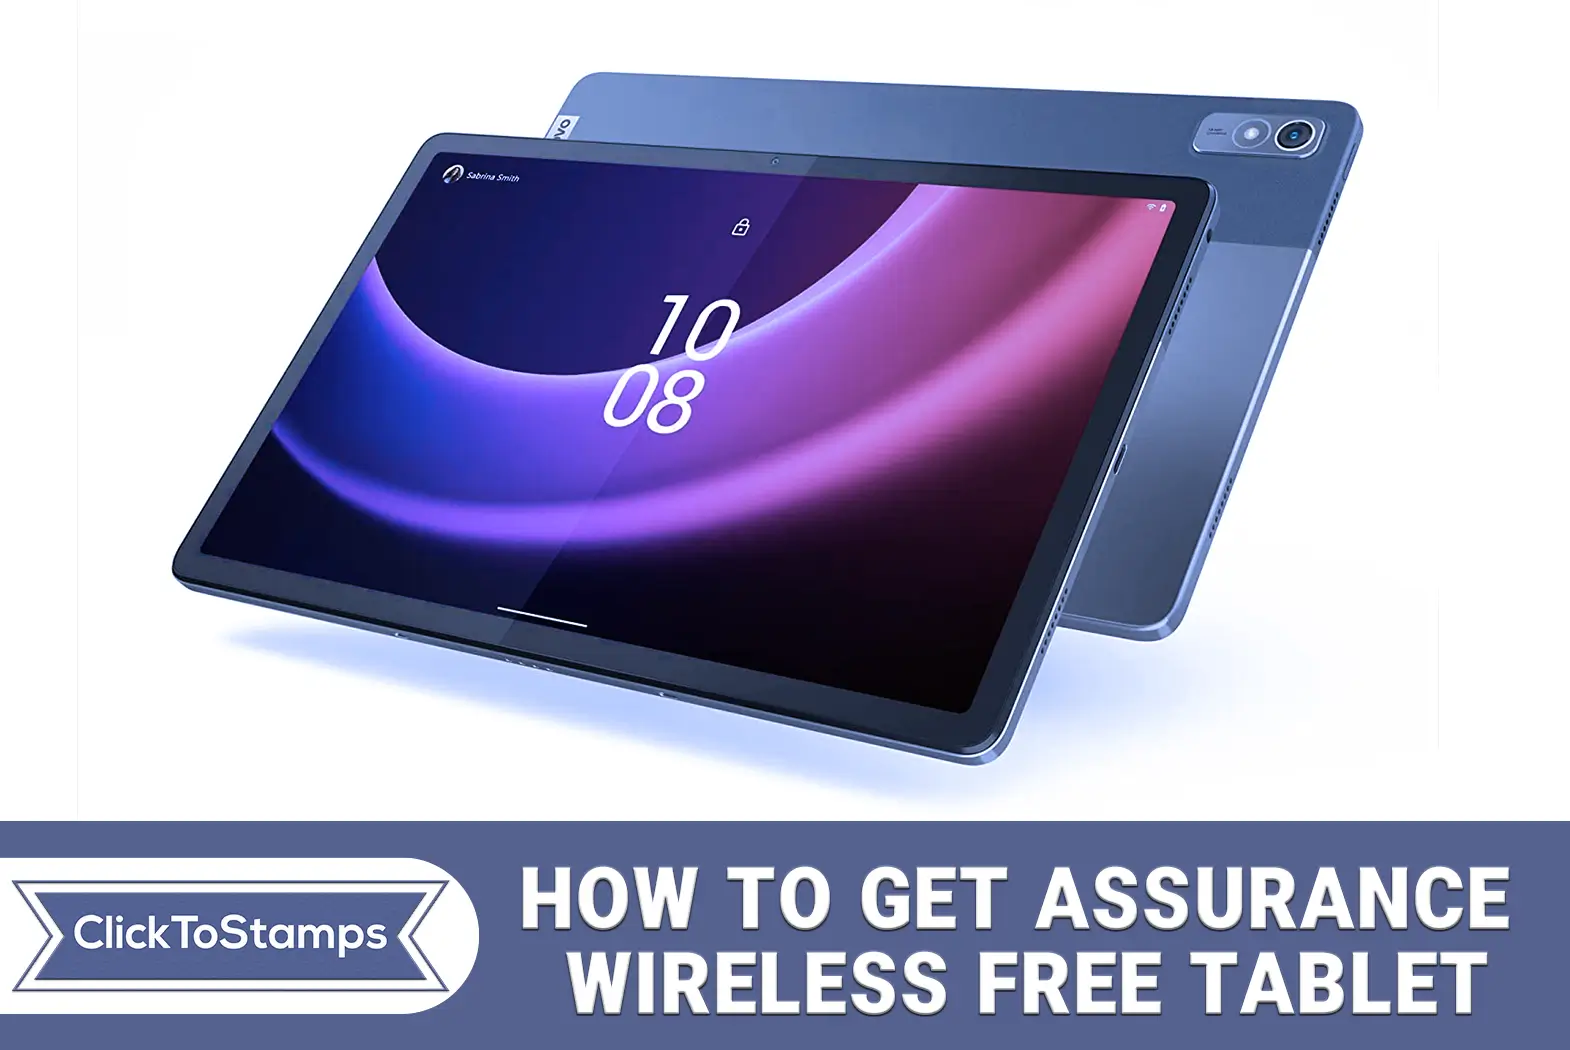 How to Get Assurance Wireless Free Tablet